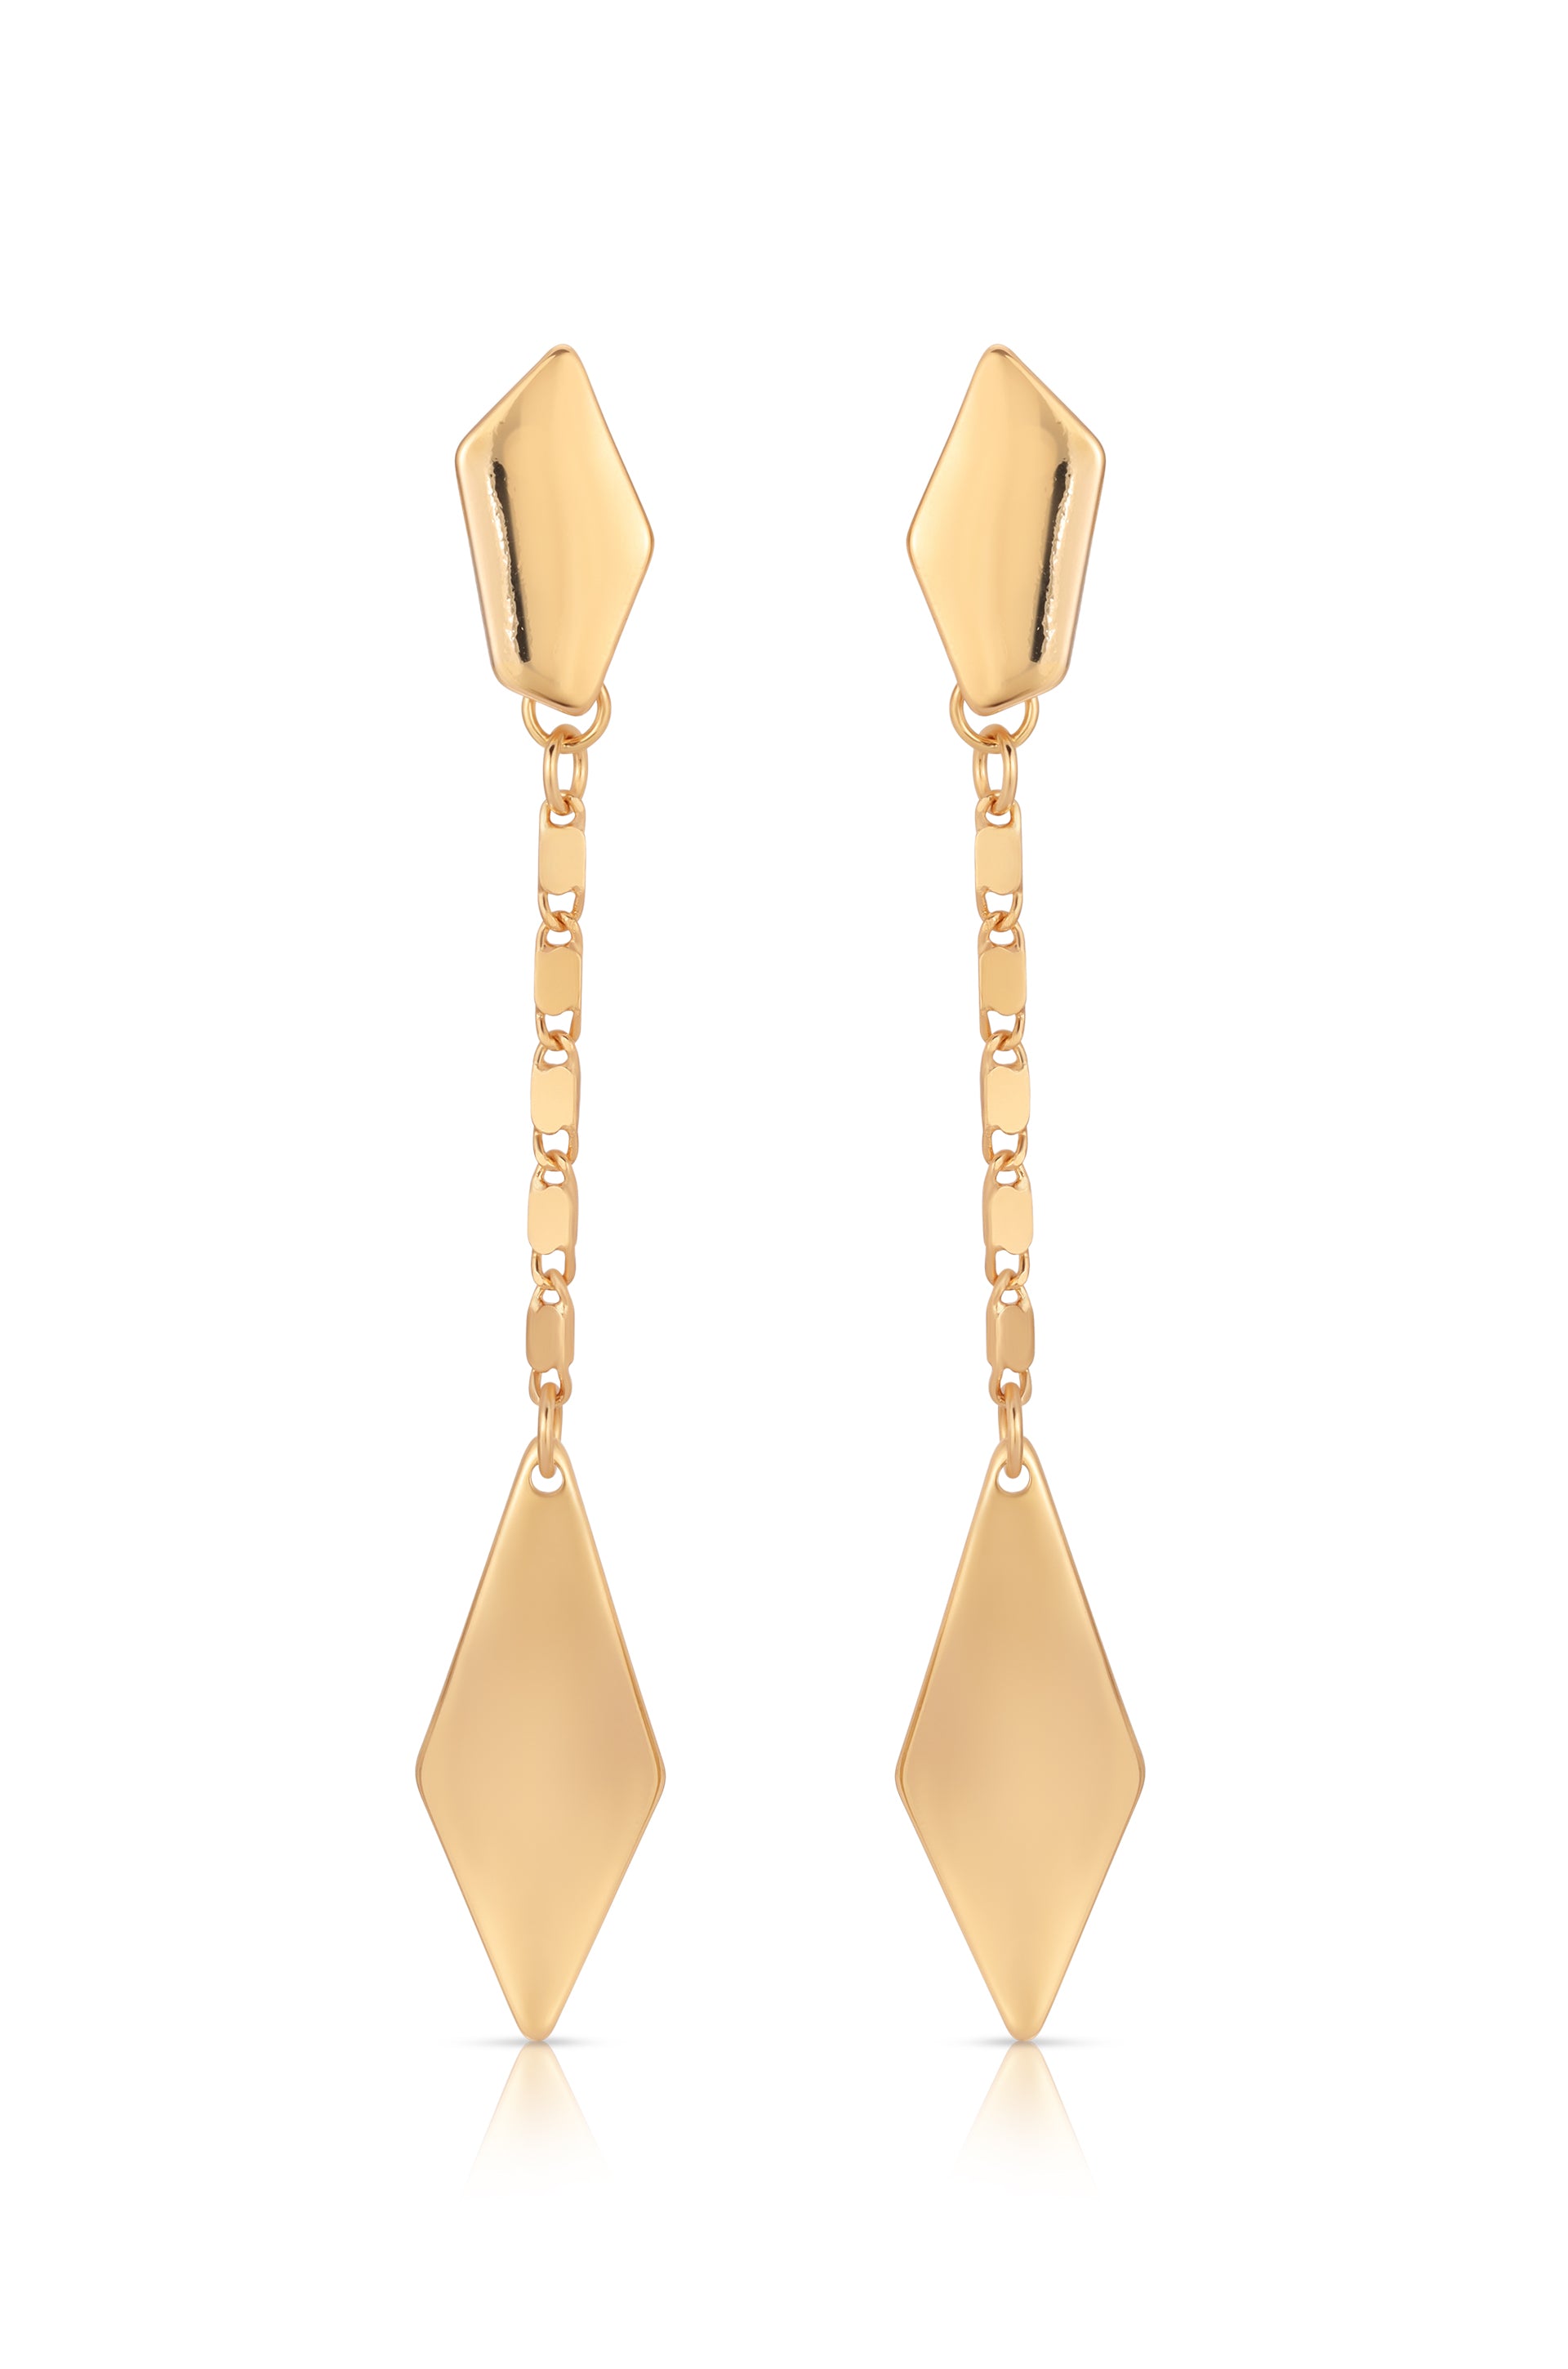 18k Gold Plated Kite Drop Earrings front view